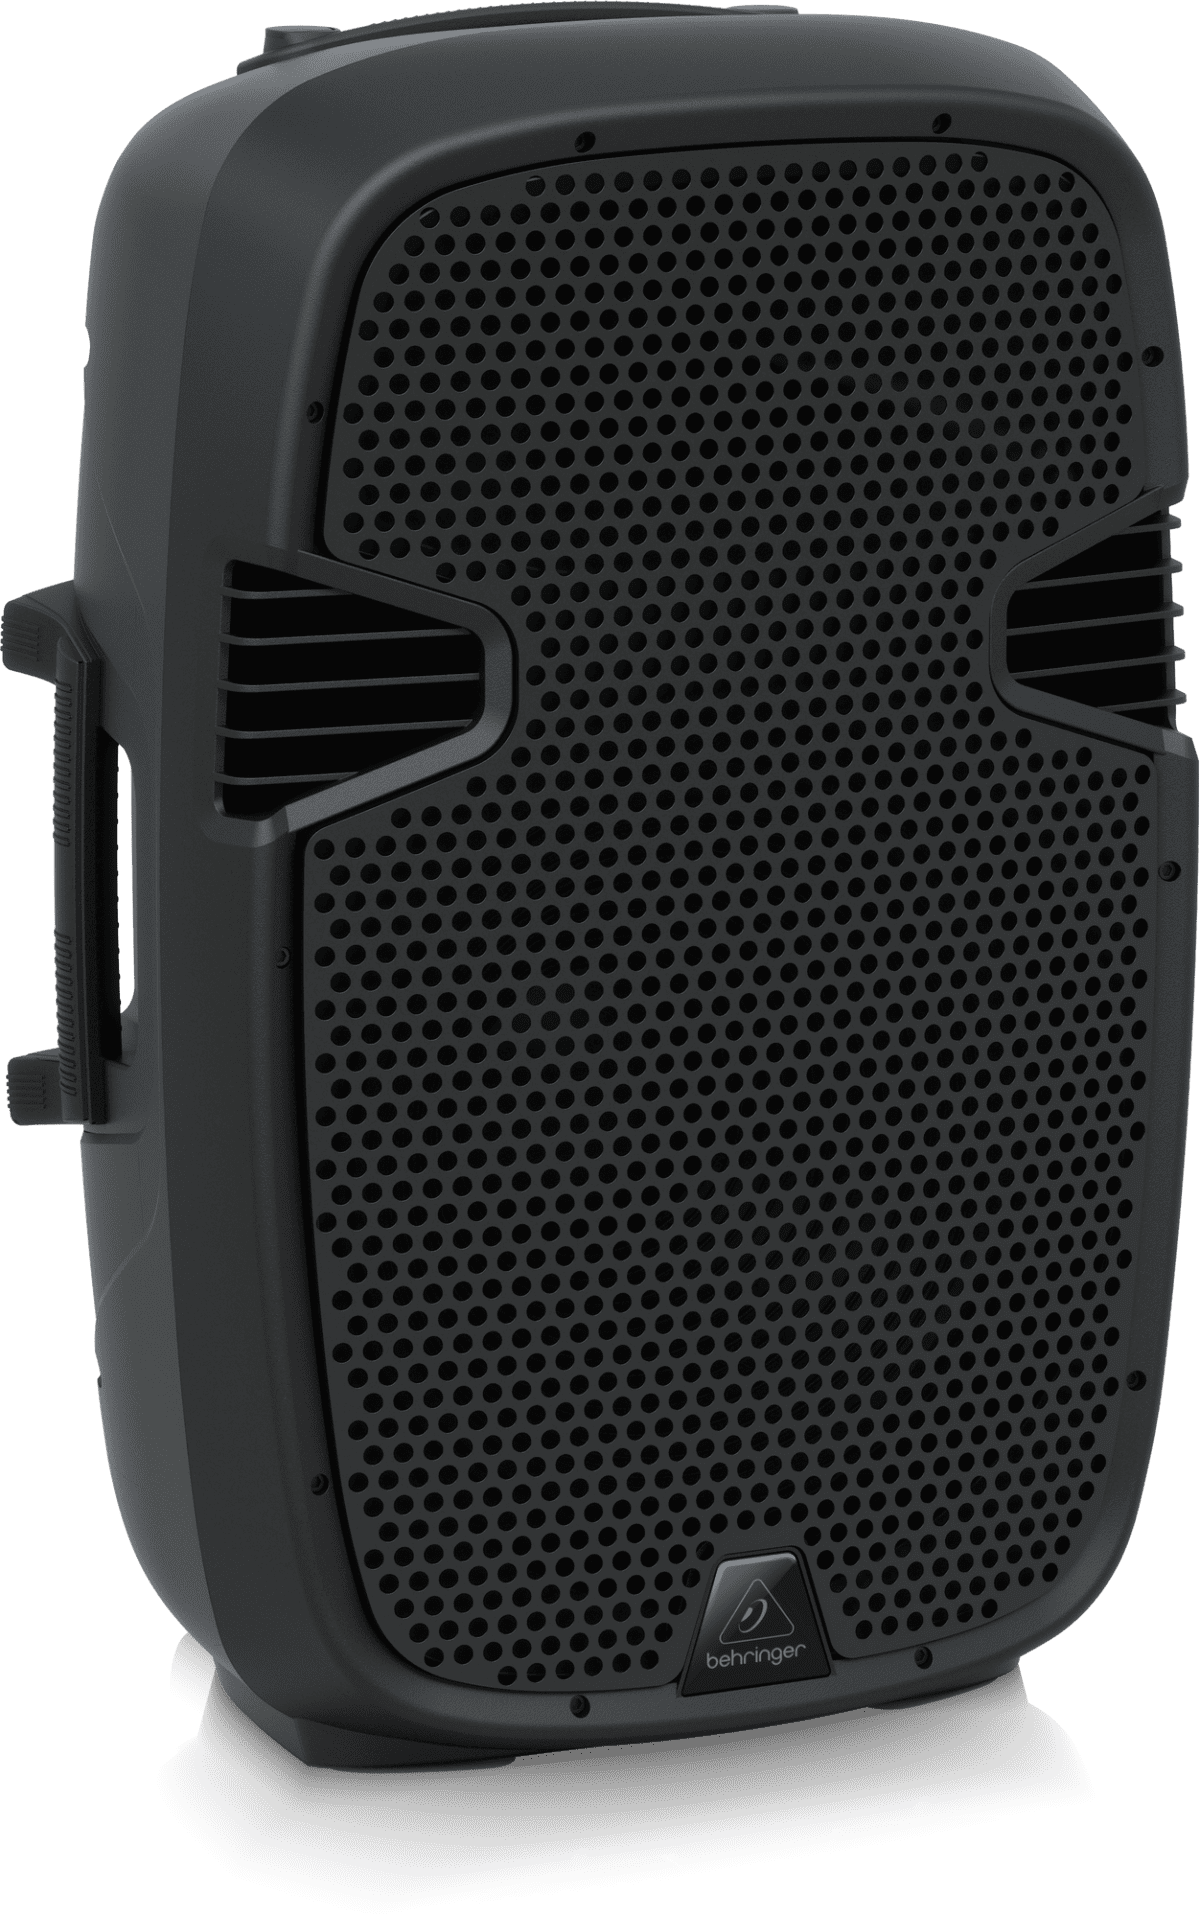 Behringer PK115A 800W 15-inch Powered Speaker with Bluetooth